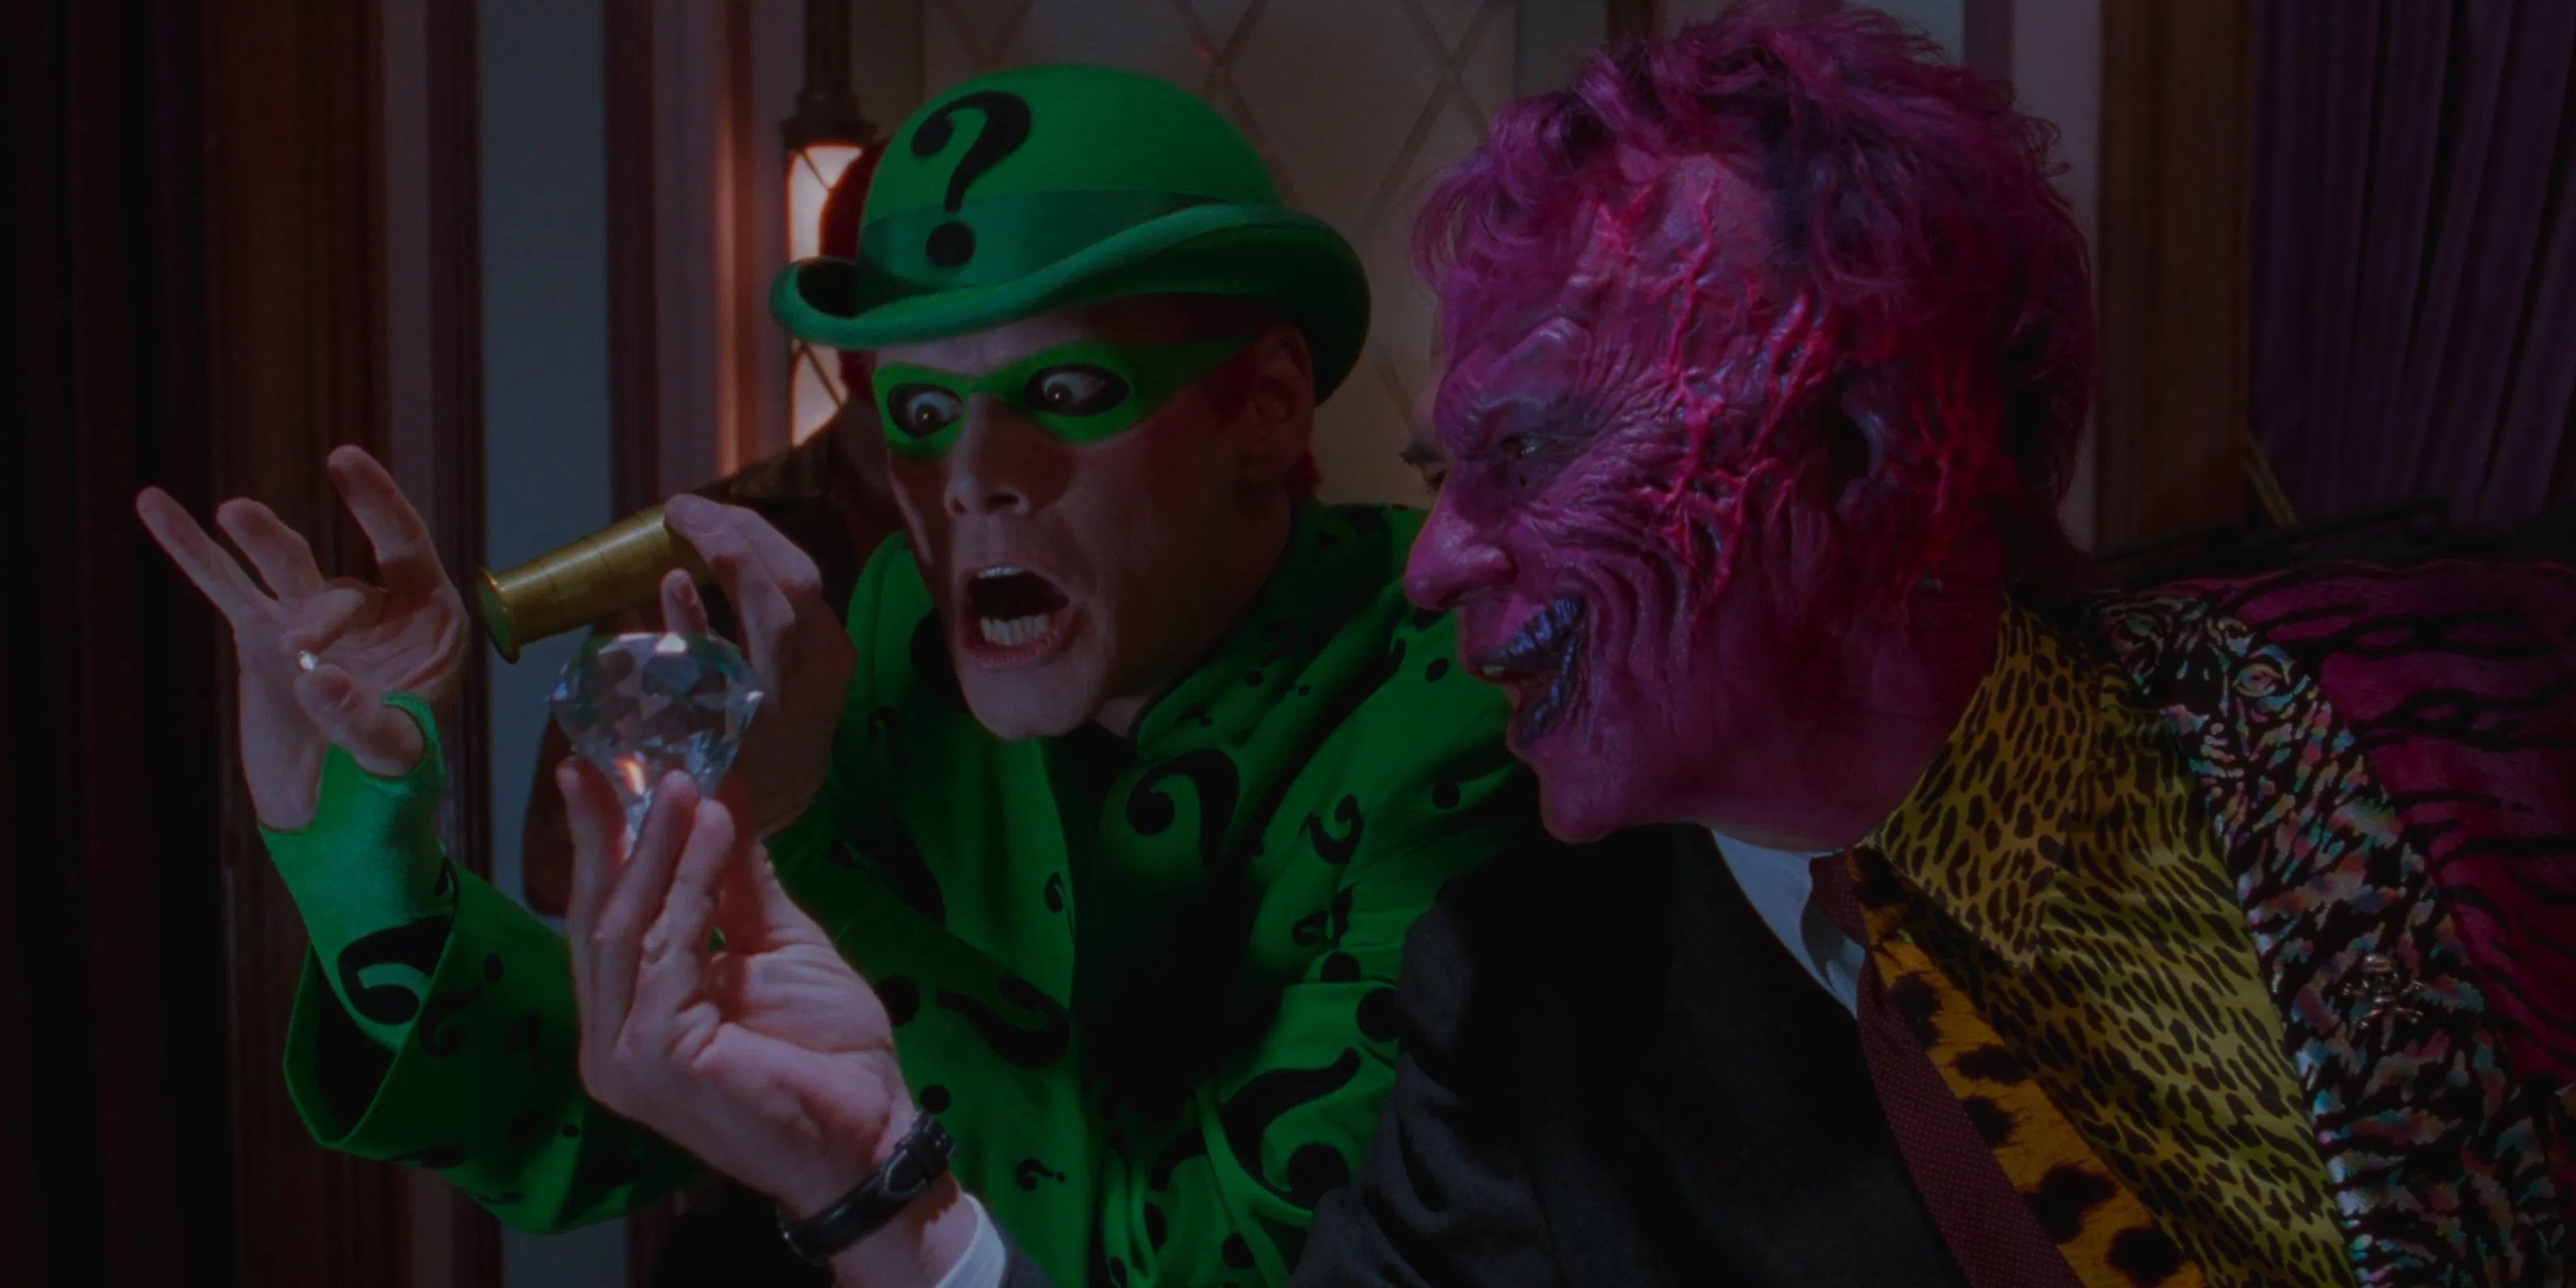 The Riddler and Two-Face in Batman Forever